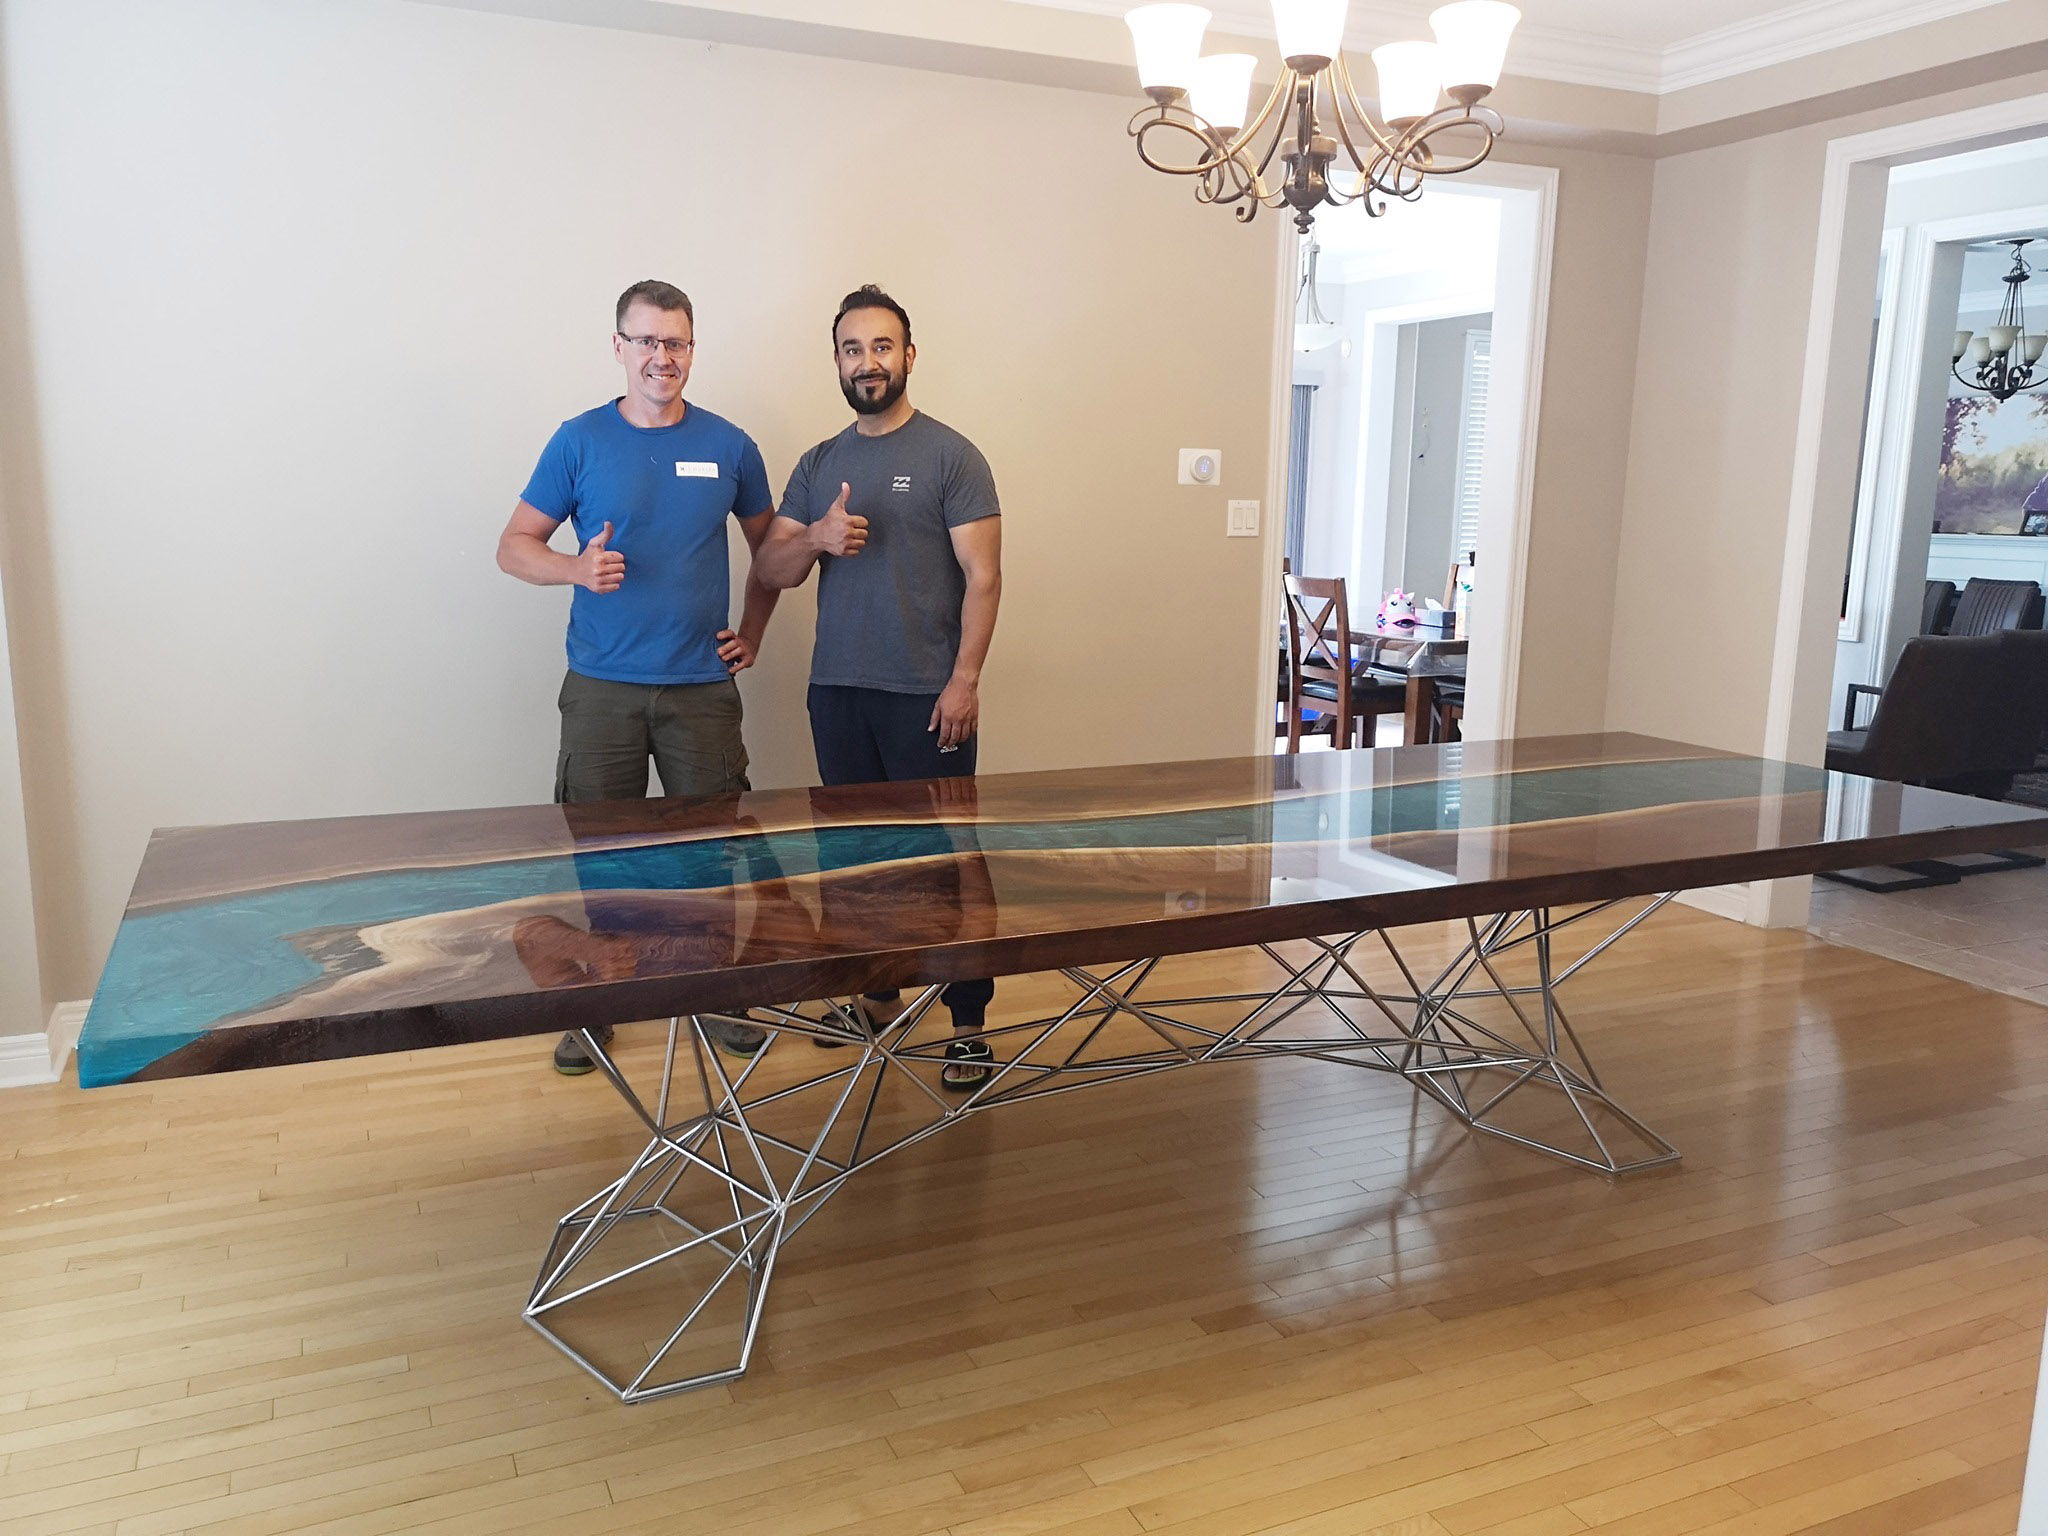 XL Walnut Dining River Table with Geometric Base